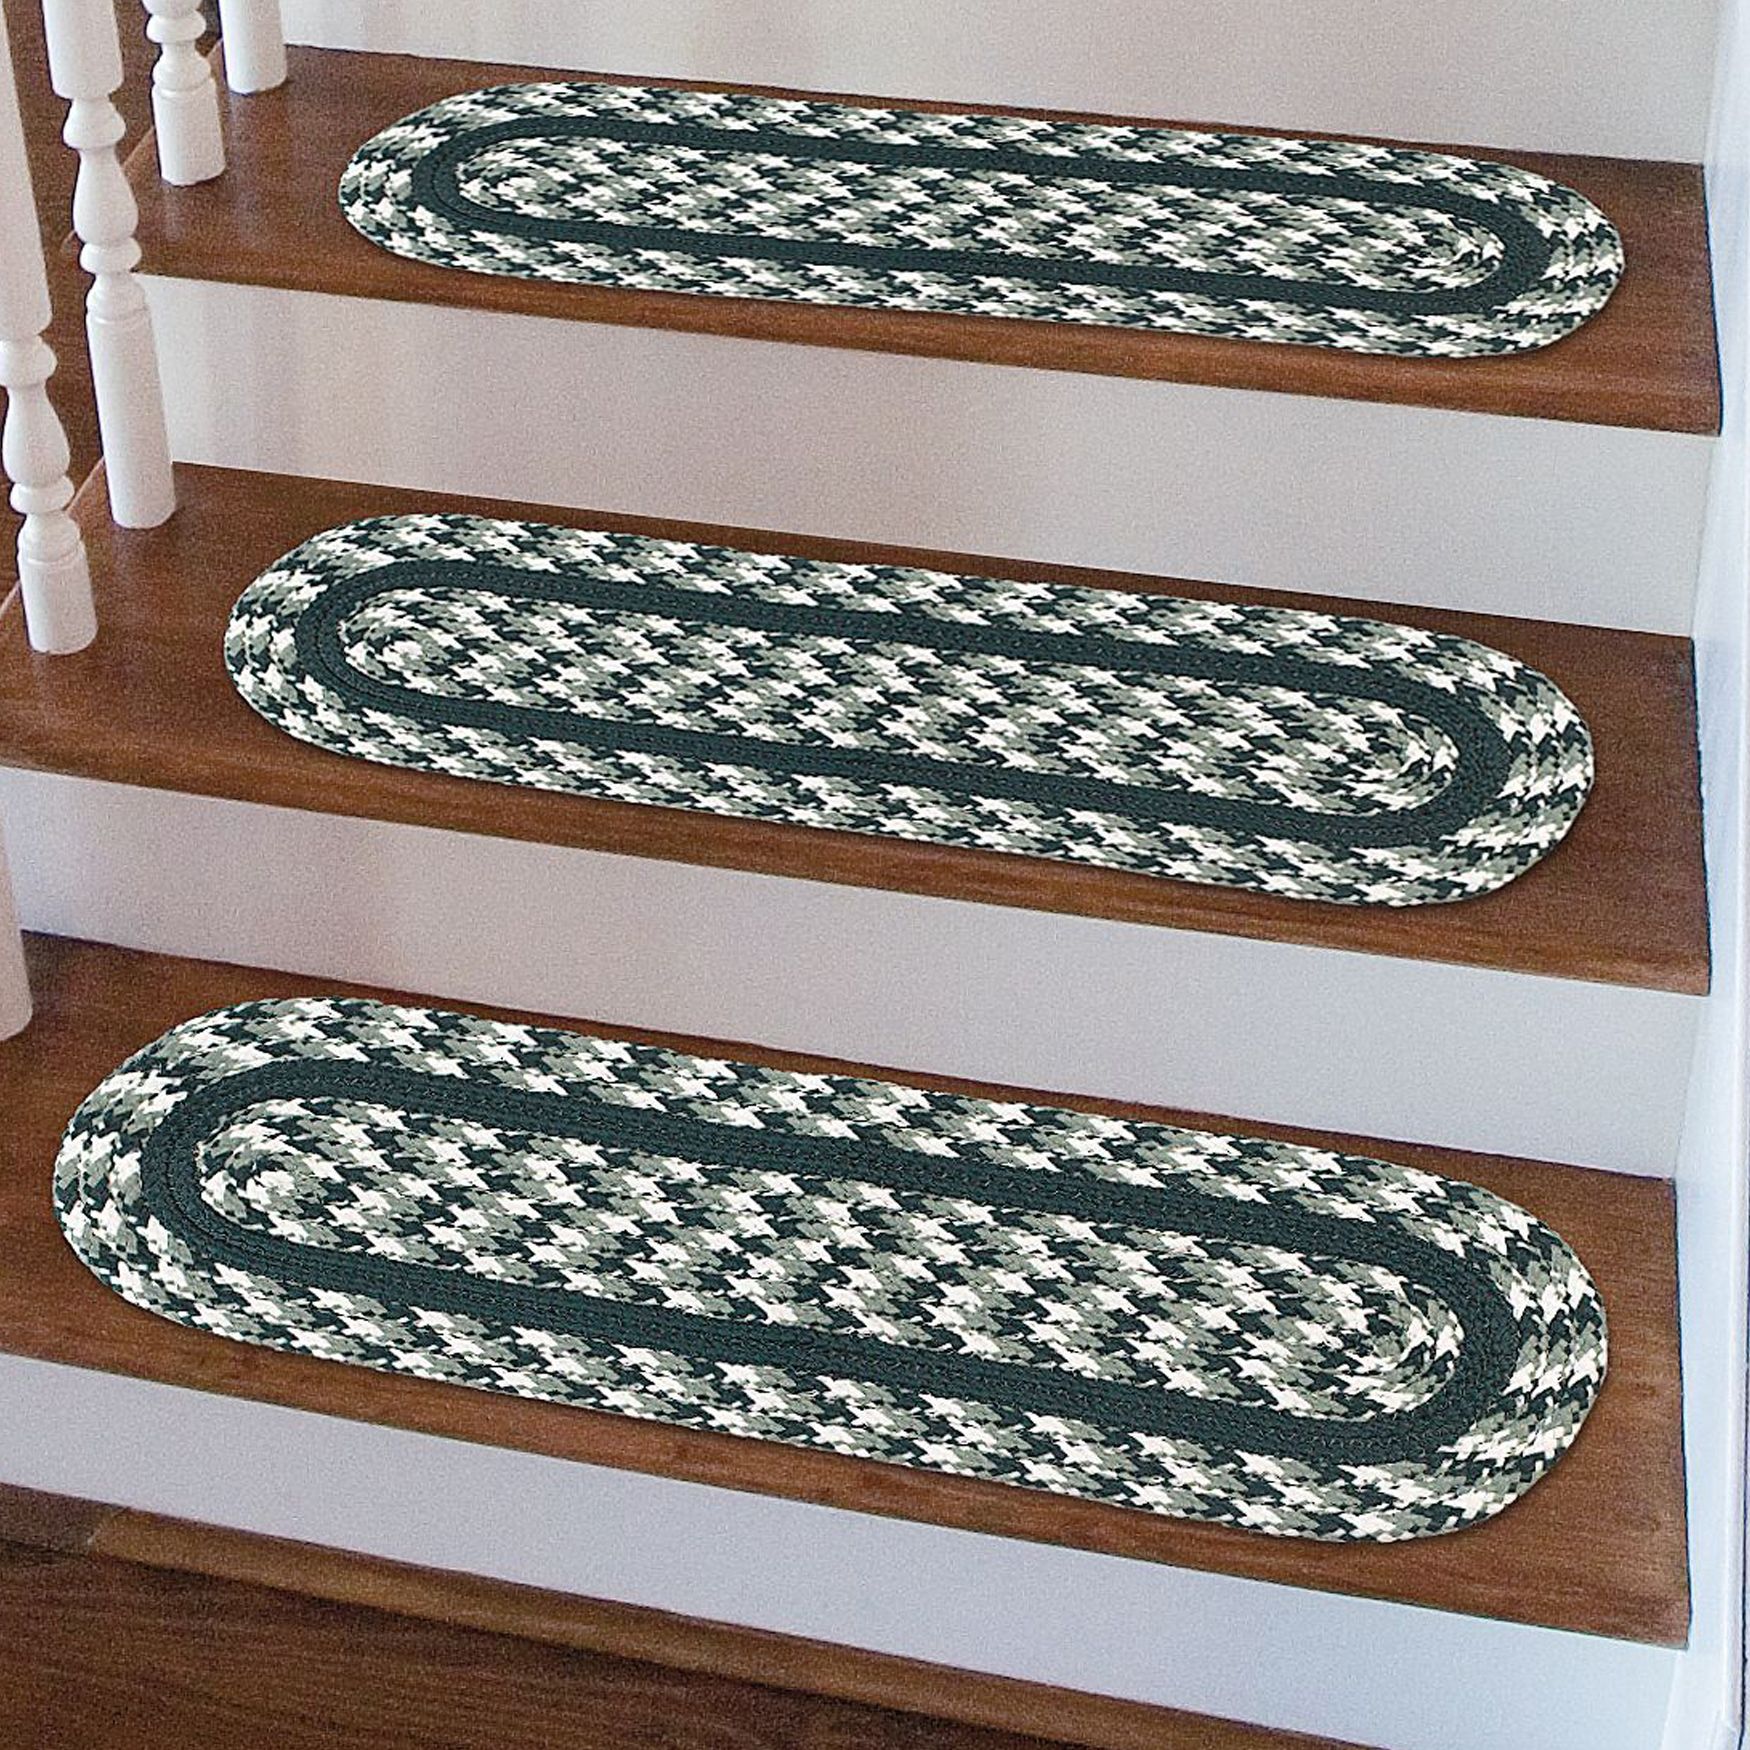 Exclusive Stair Tread Rugs Latest Door Stair Design Inside Braided Carpet Stair Treads (View 11 of 20)